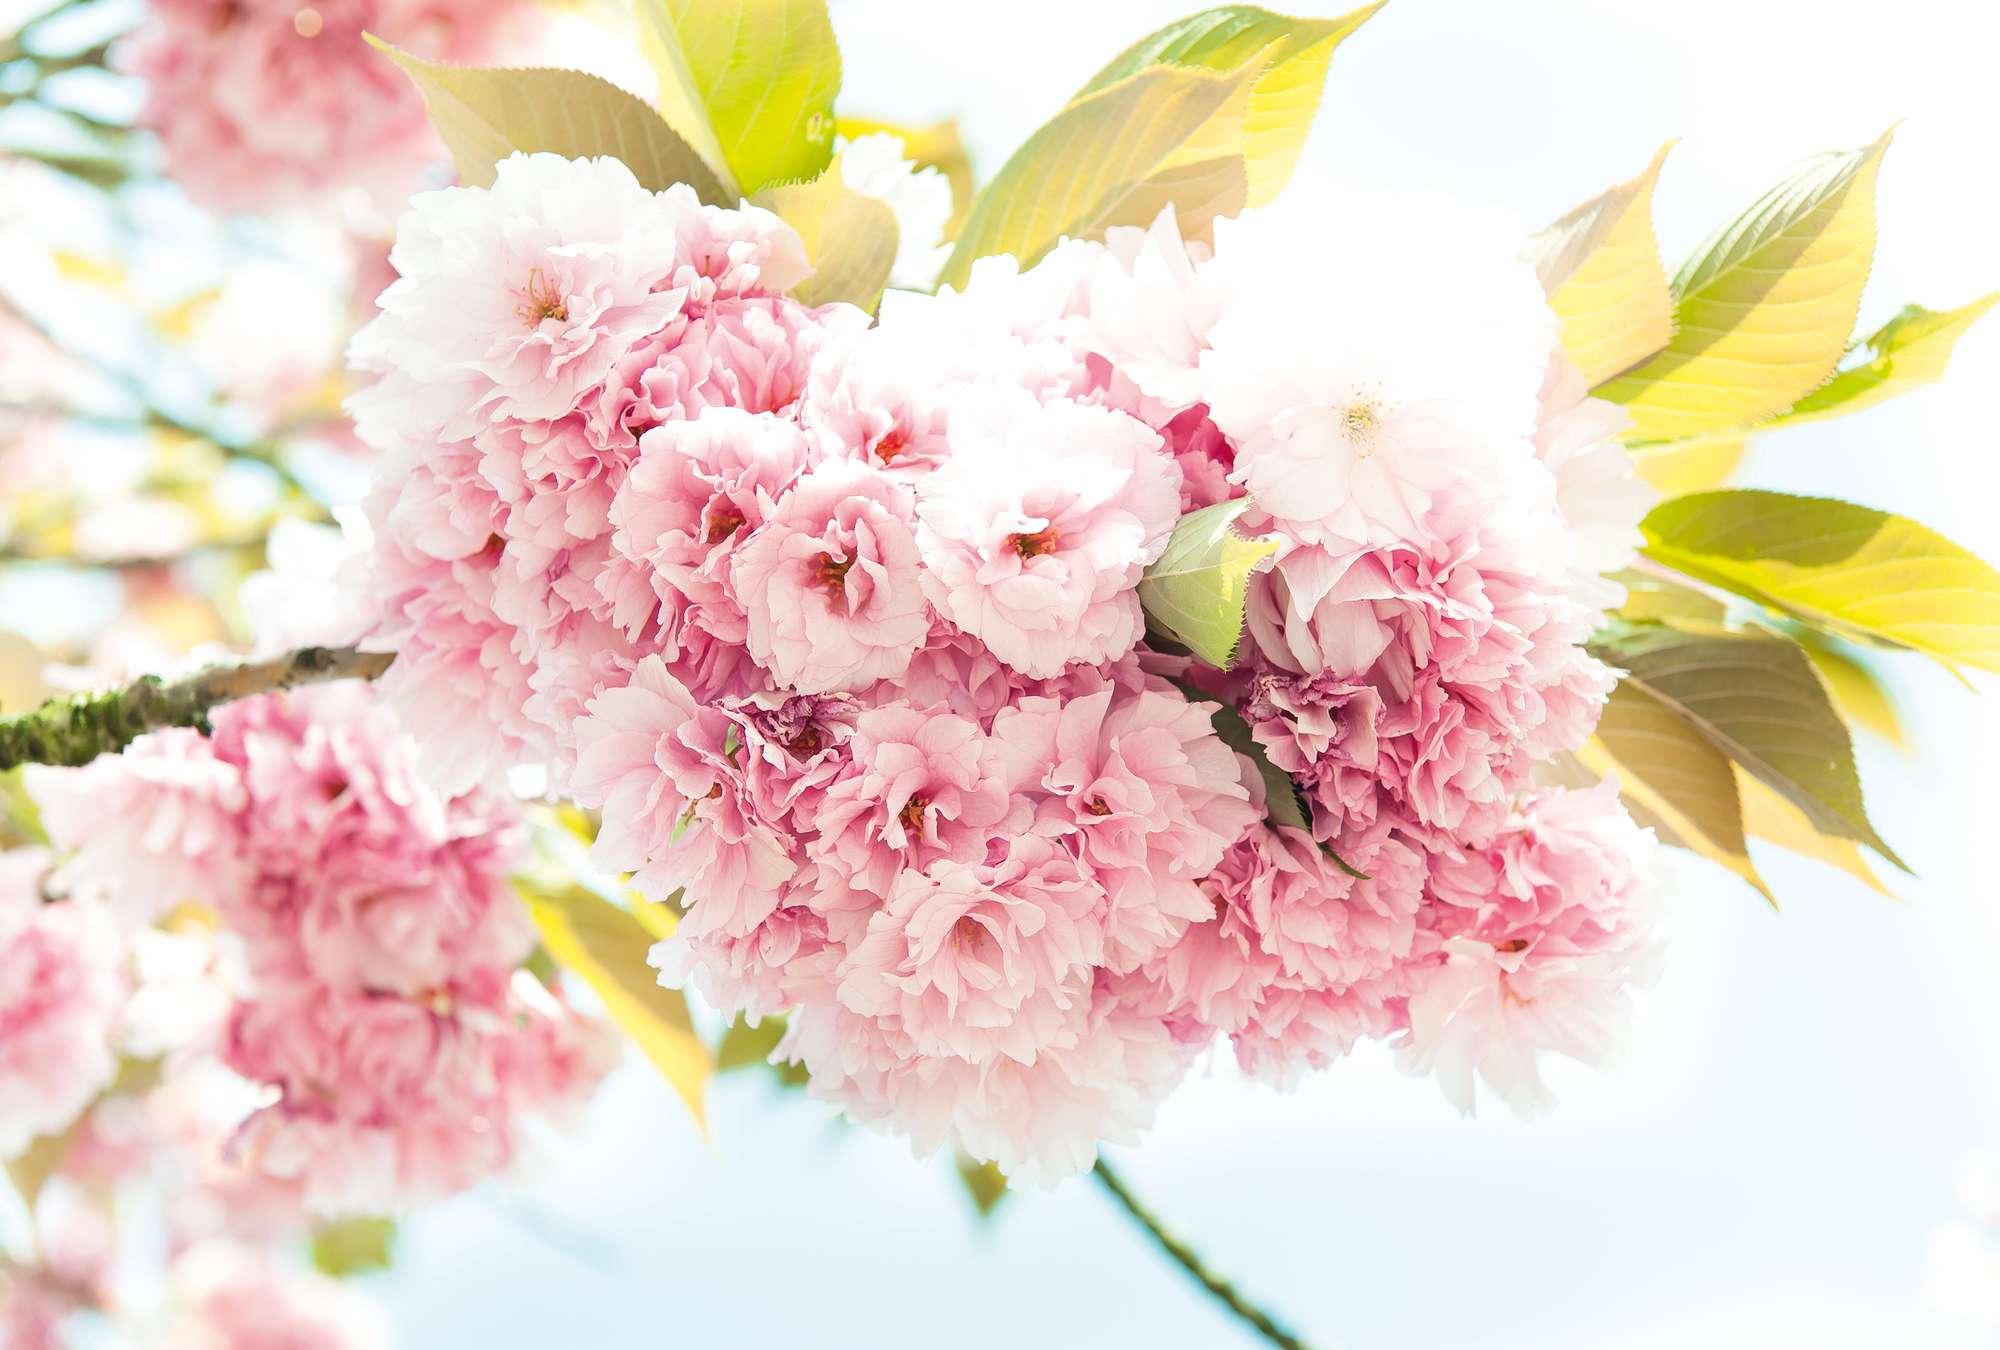             Spring, pink - Delicate flowers in 3D look and XXL format
        